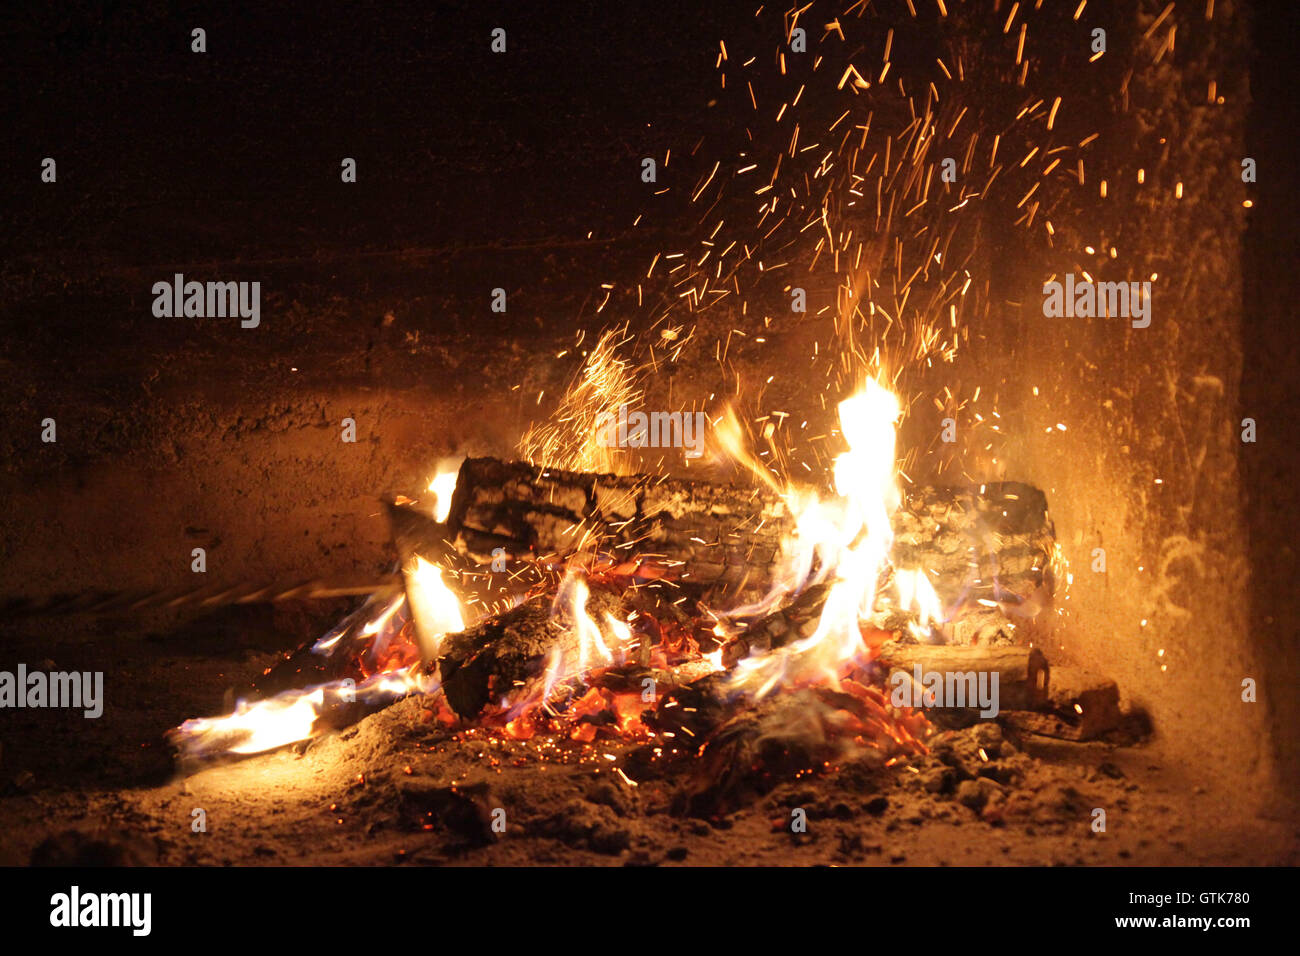 Lively open fire Stock Photo